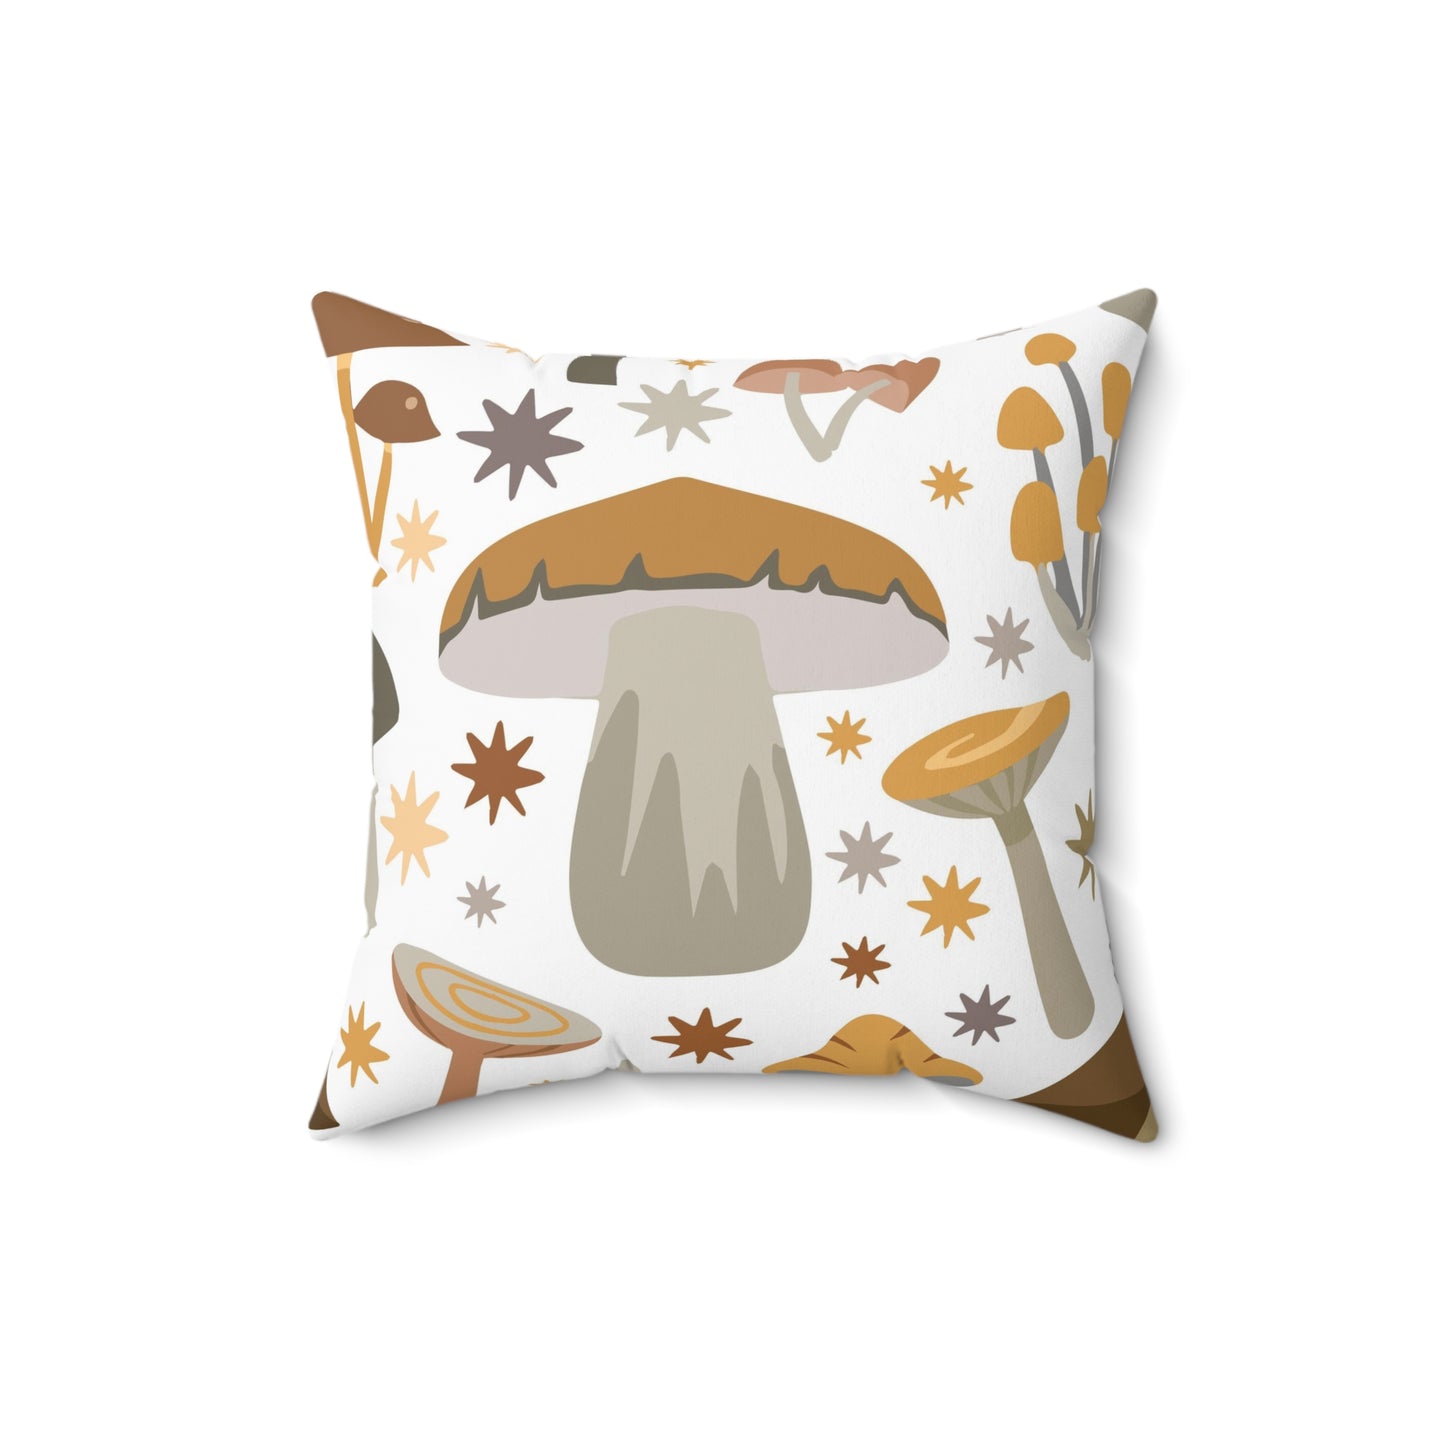 Mushroom Decorate Throw Pillow for Couch Decorative Throw Pillow Cover  Square Pillow